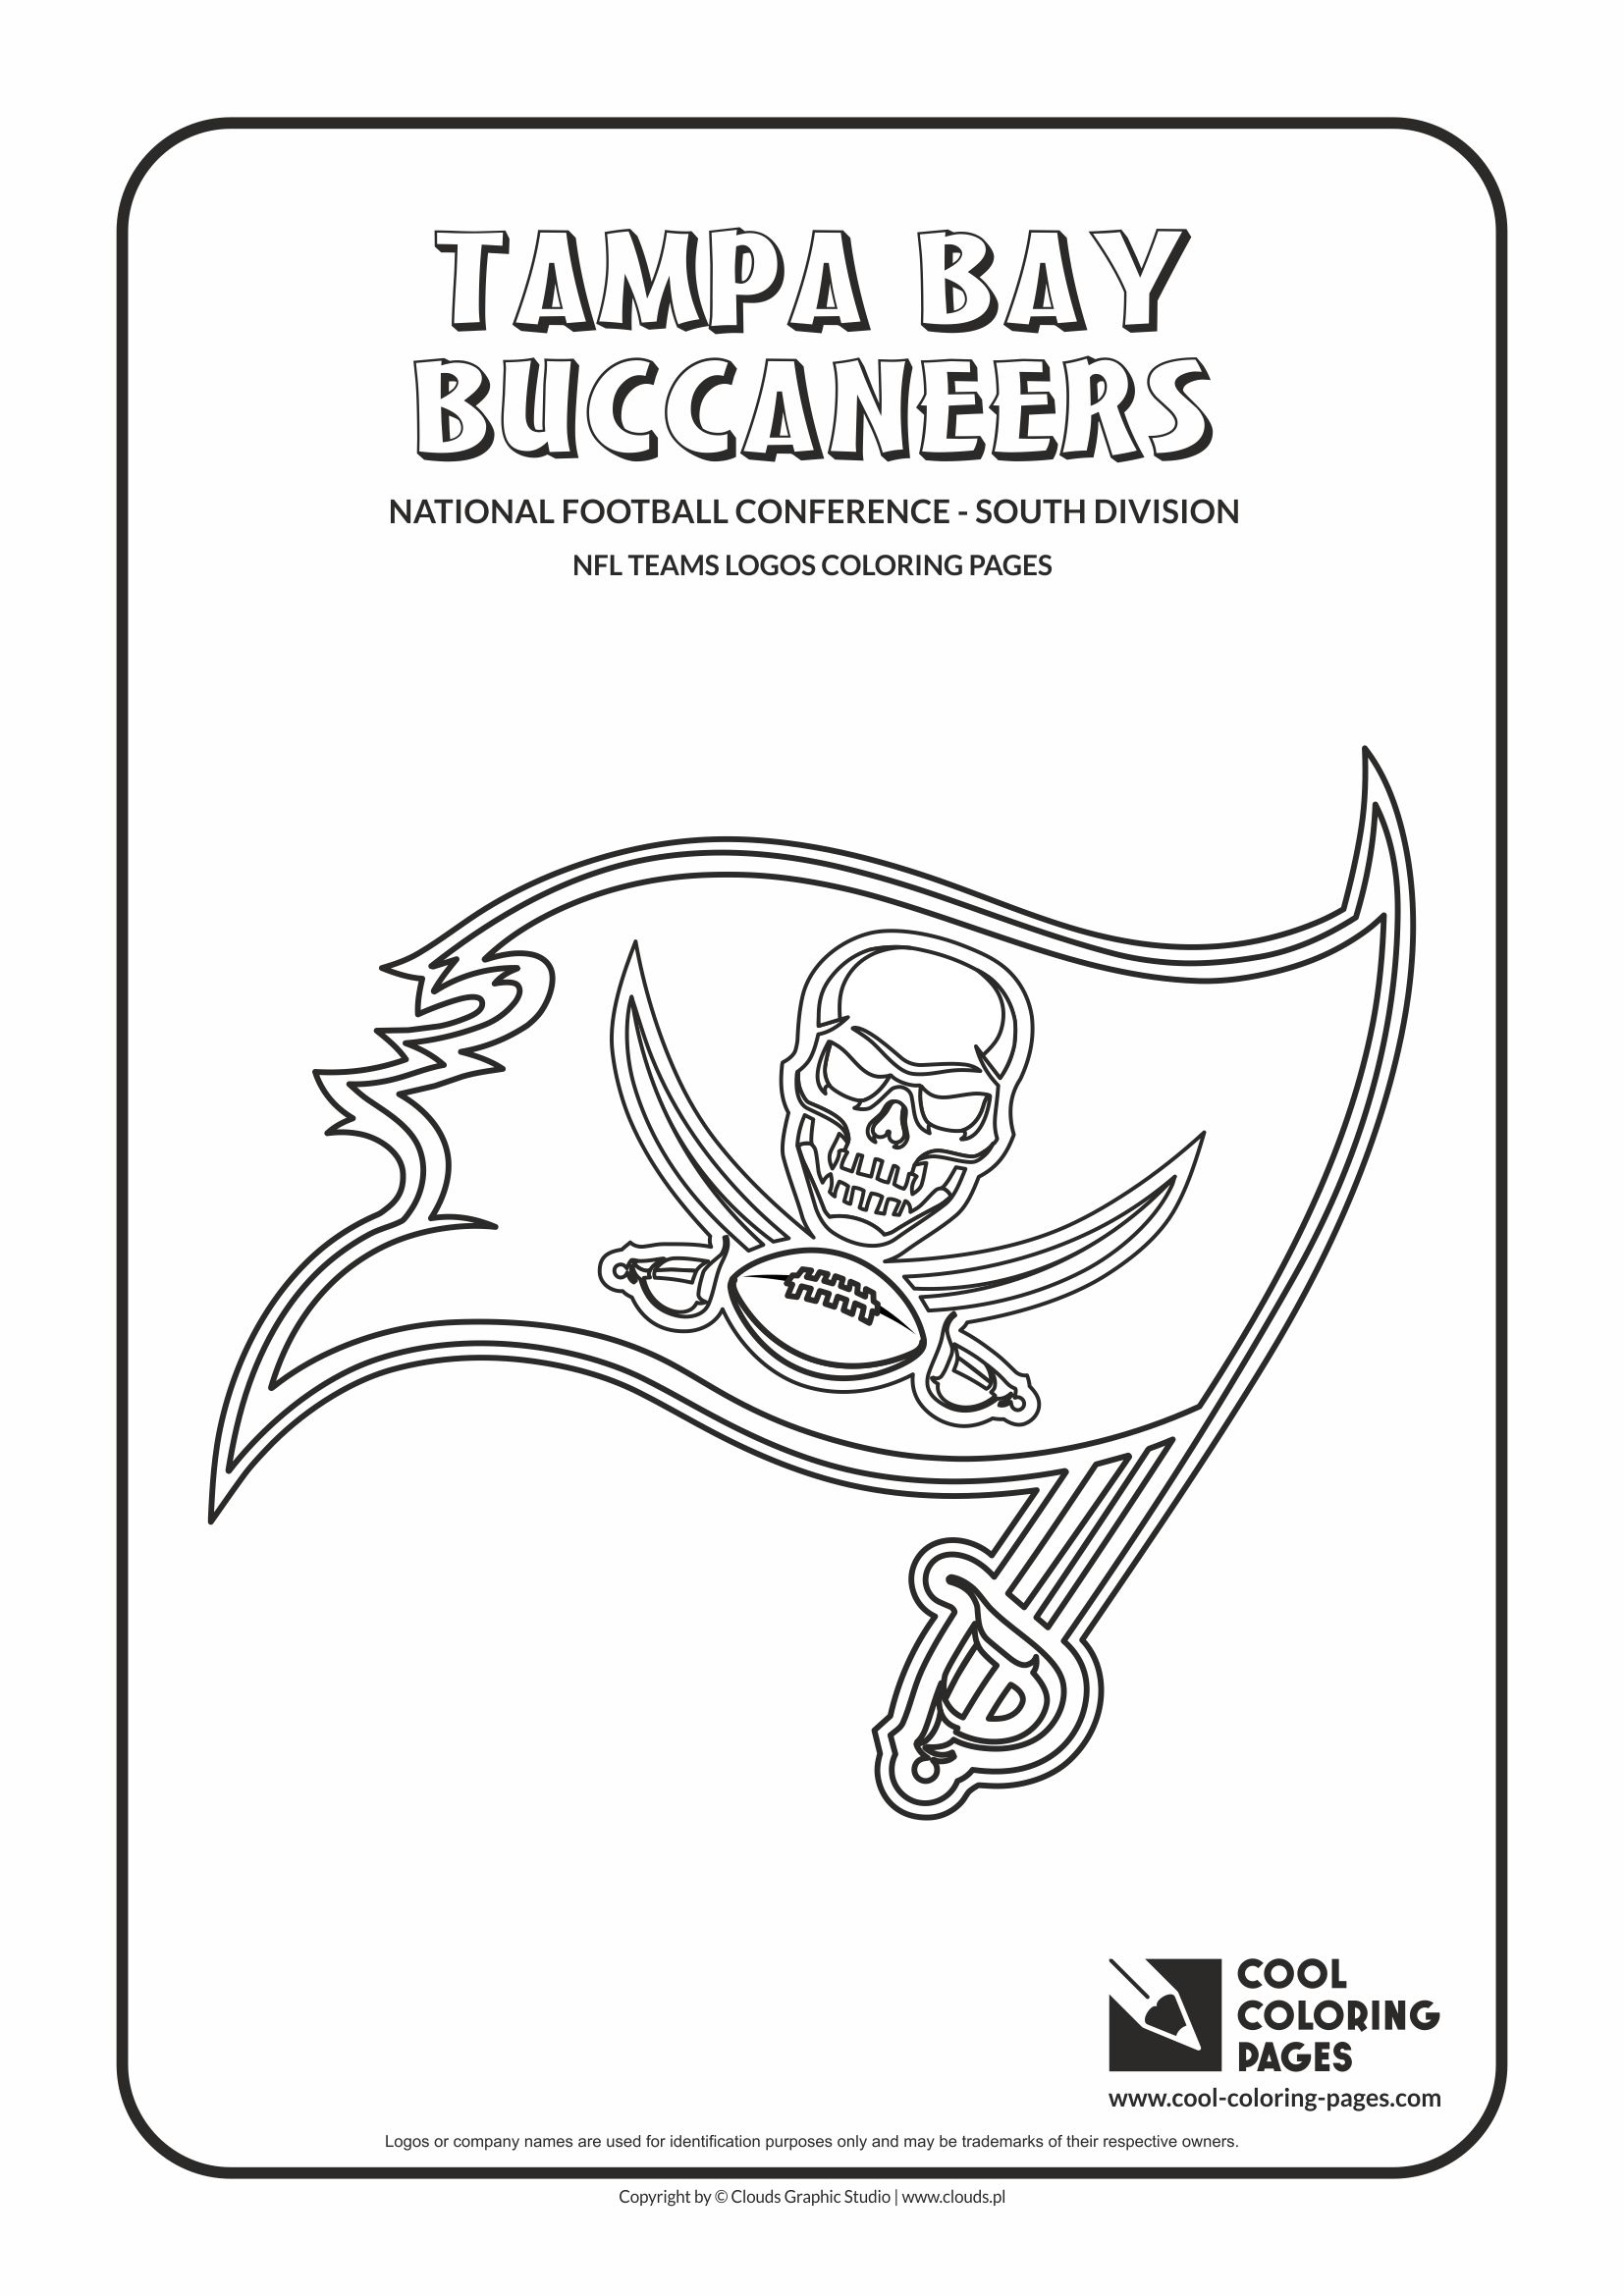 Cool Coloring Pages Tampa Bay Buccaneers - NFL American 